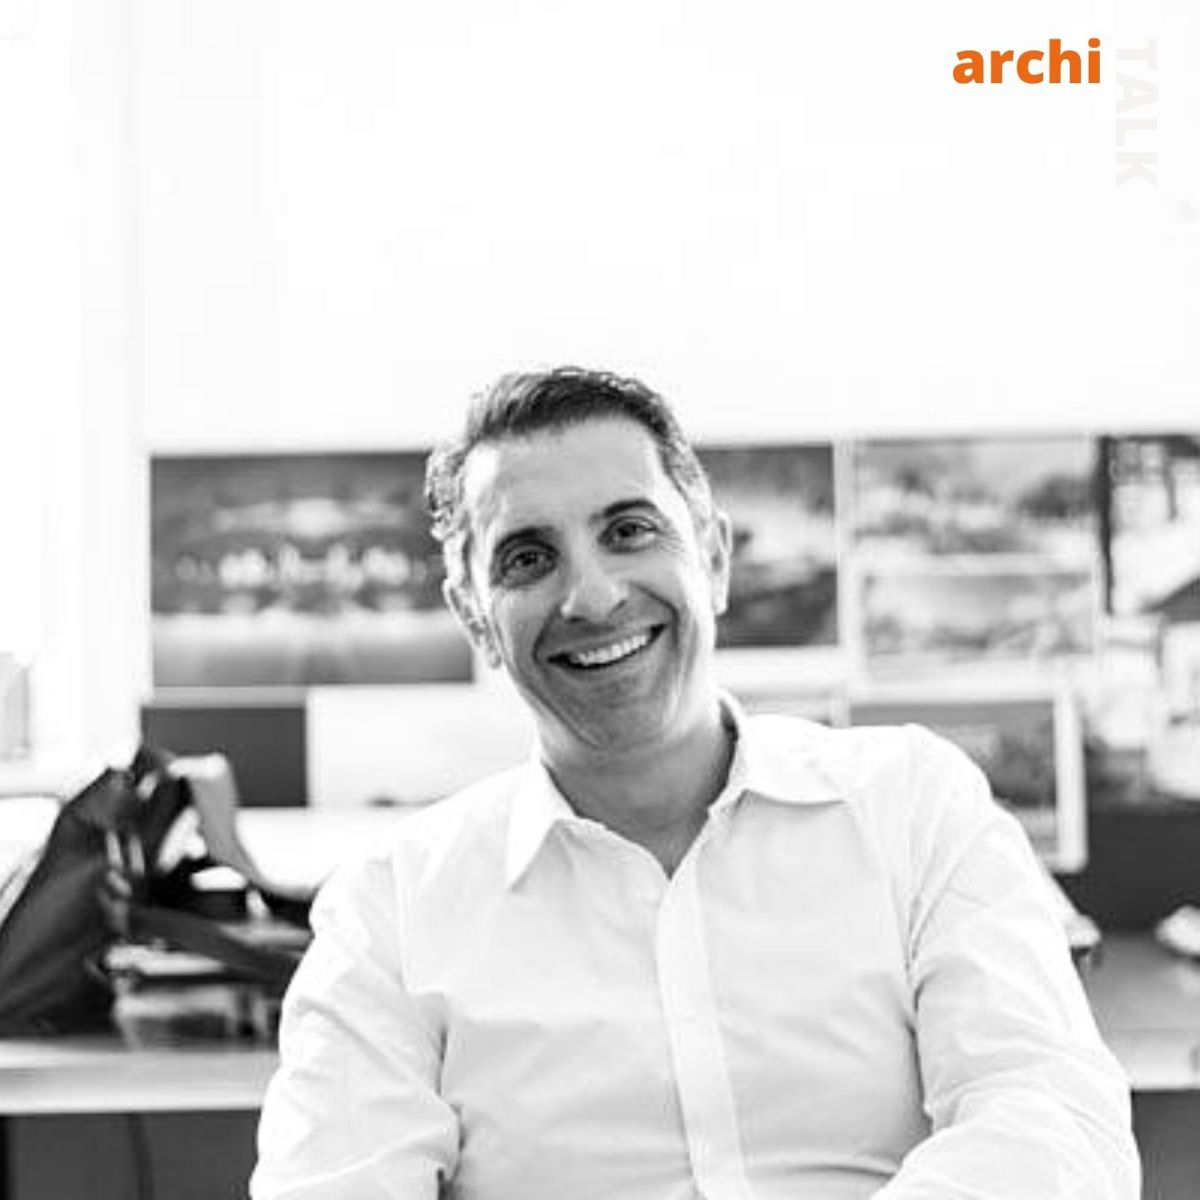 archiTALK with Vince Squillace